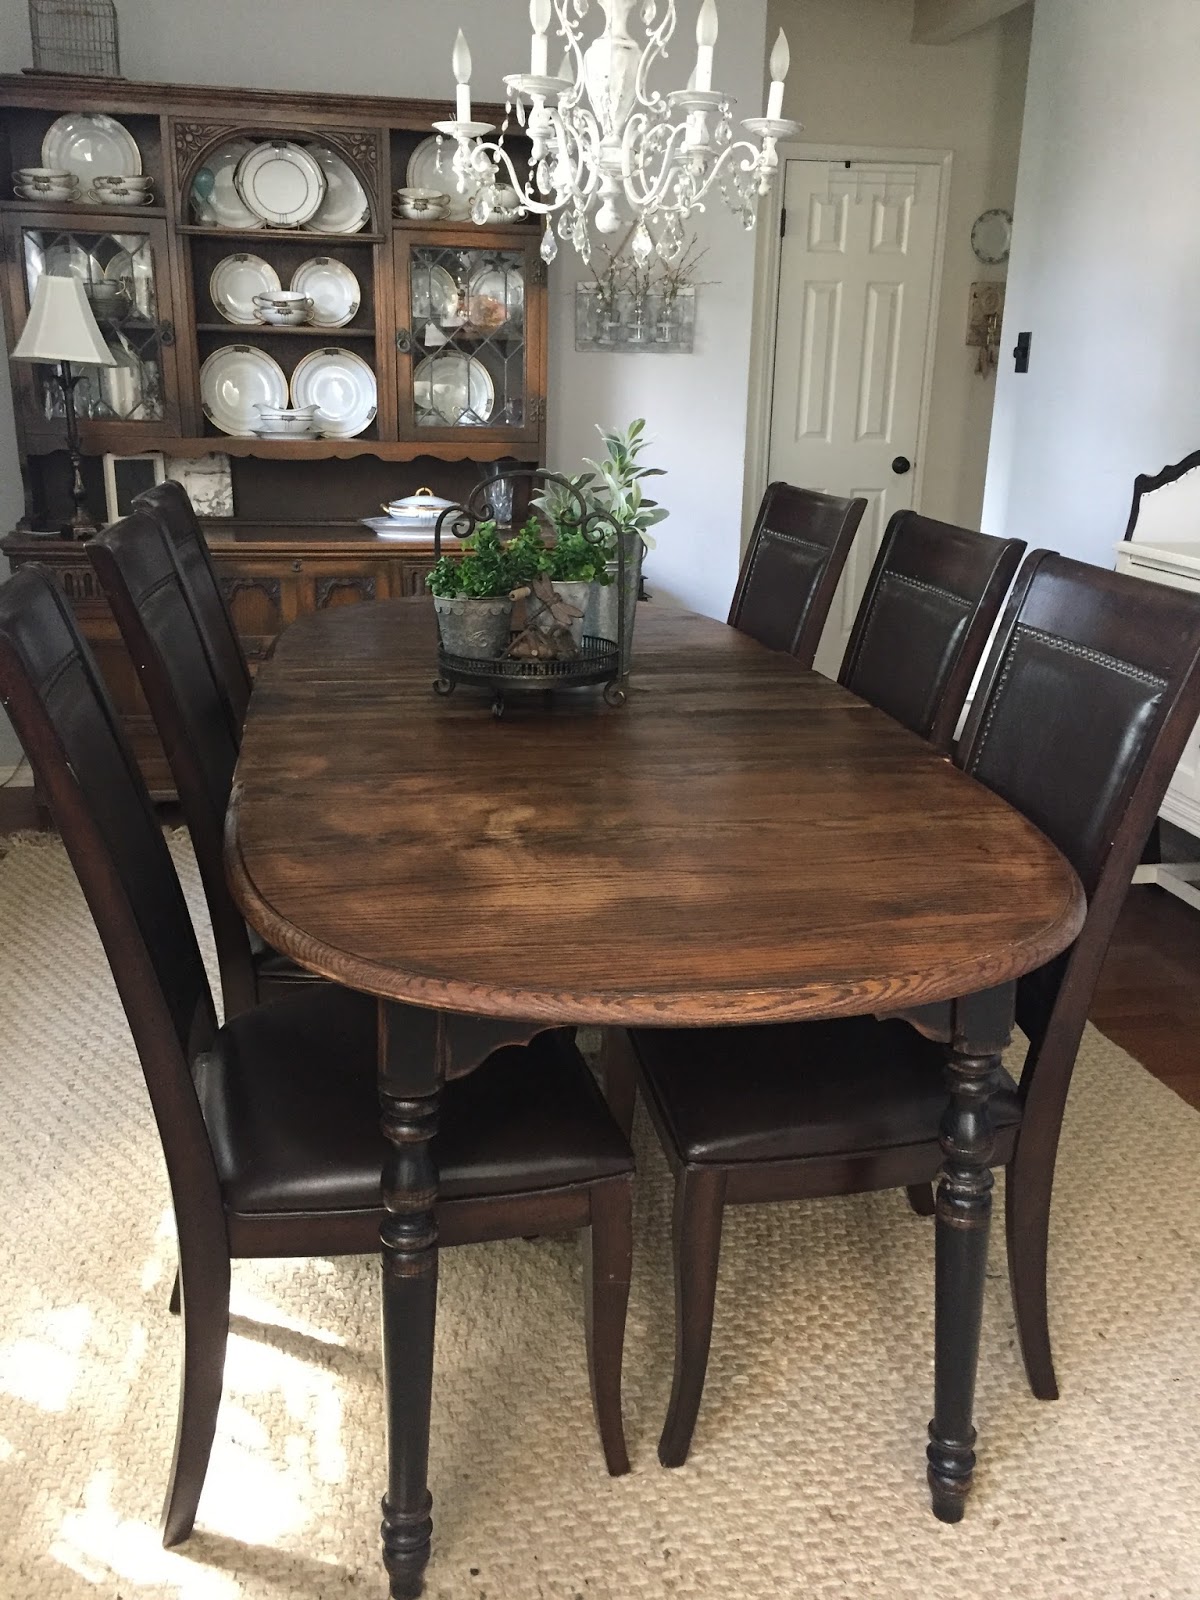 Let's Add Sprinkles: Refinishing The Dining Room Table